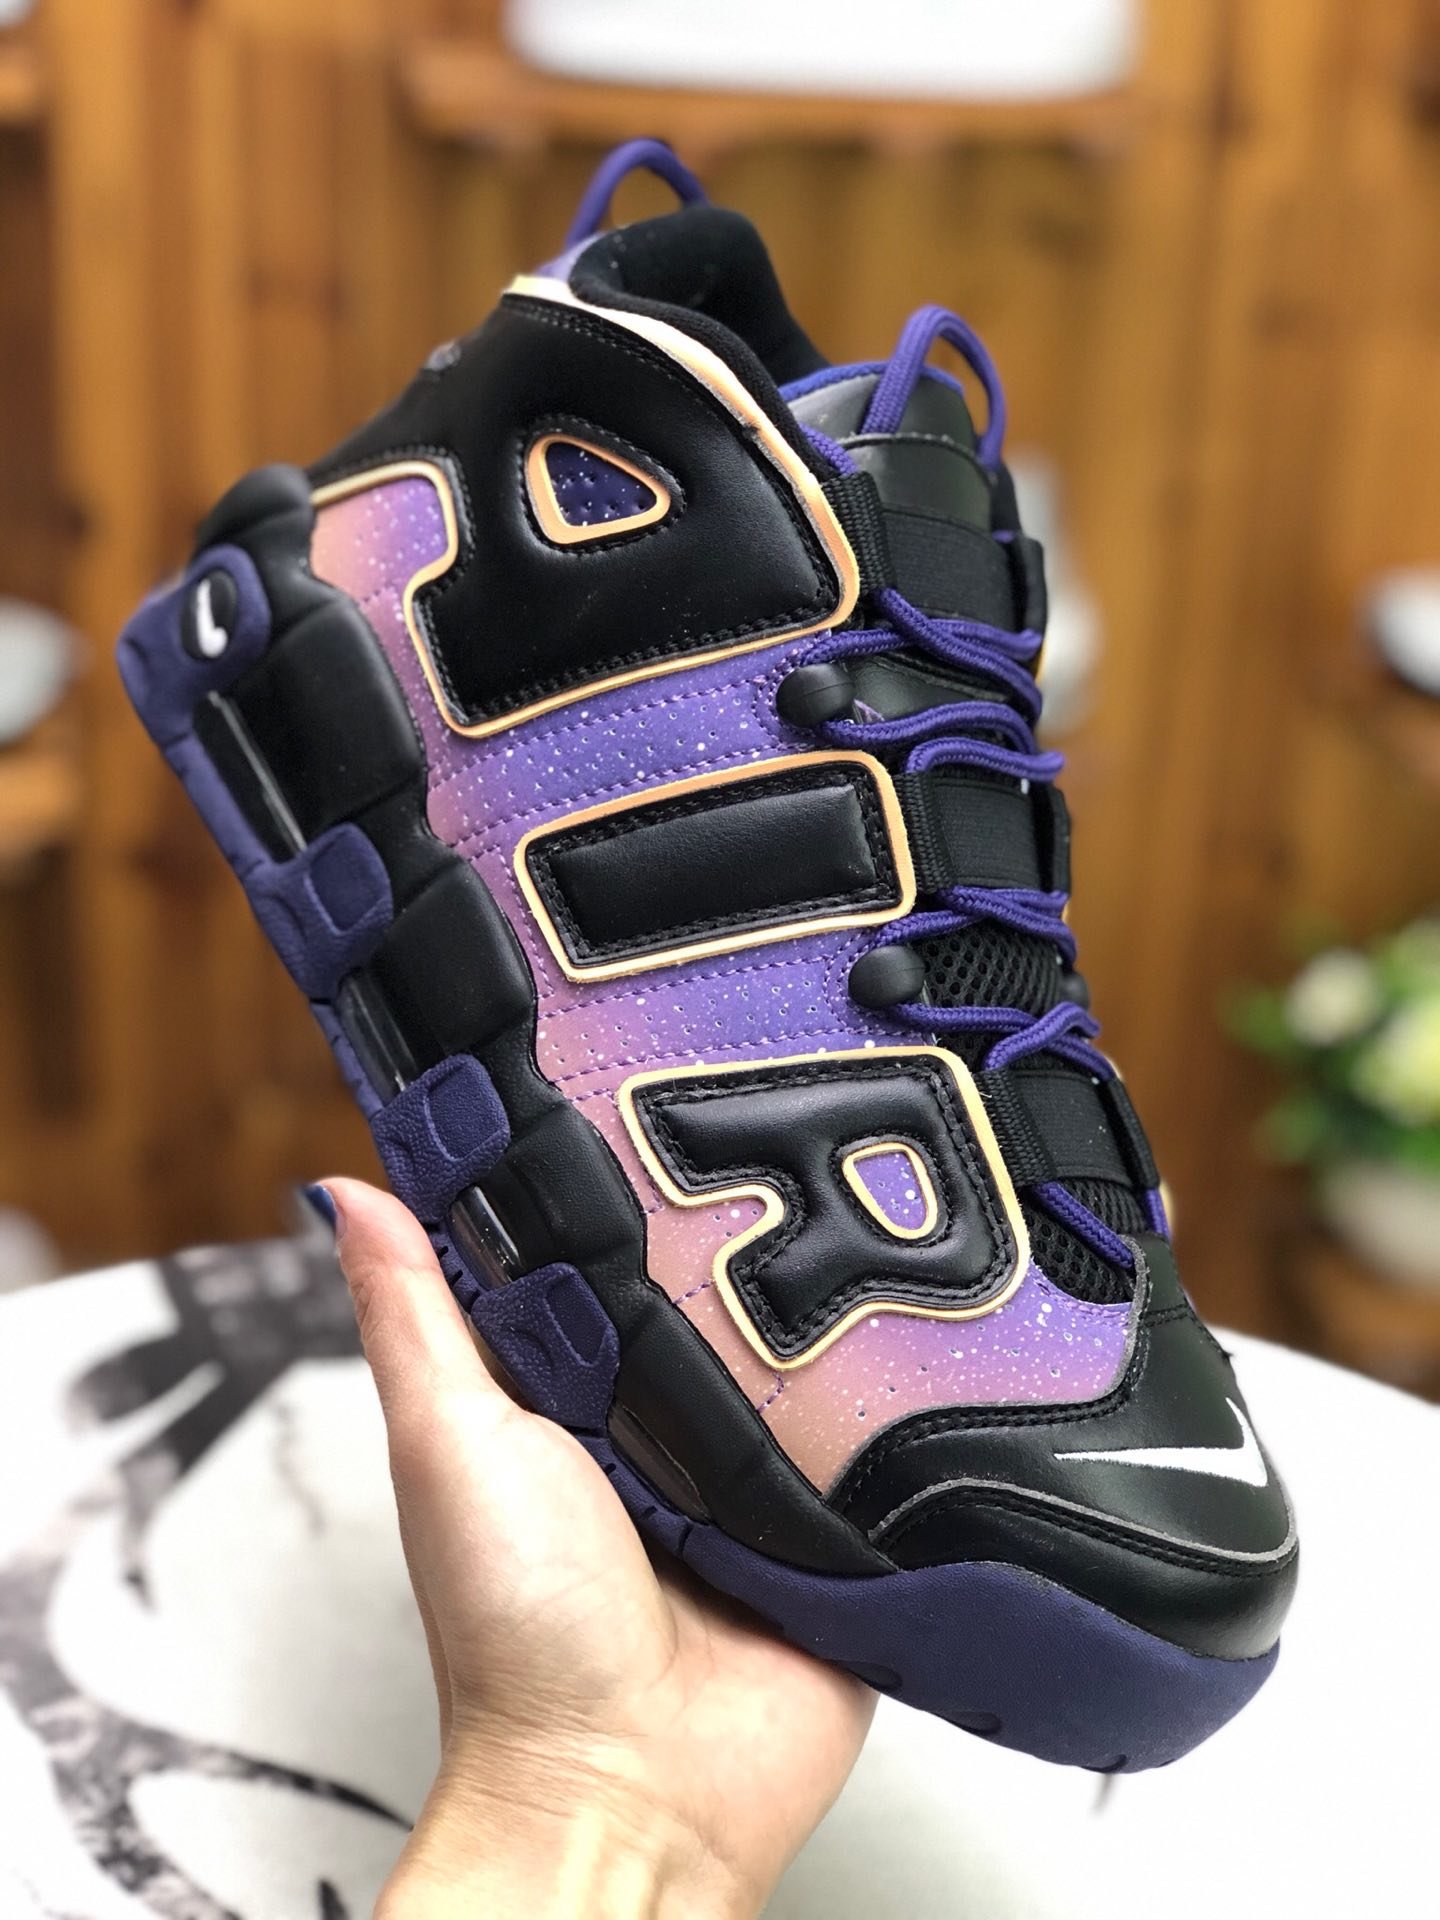 Nike Air More Uptempo “Dawn To Dusk” 553546-018 For Sale – Sneaker 